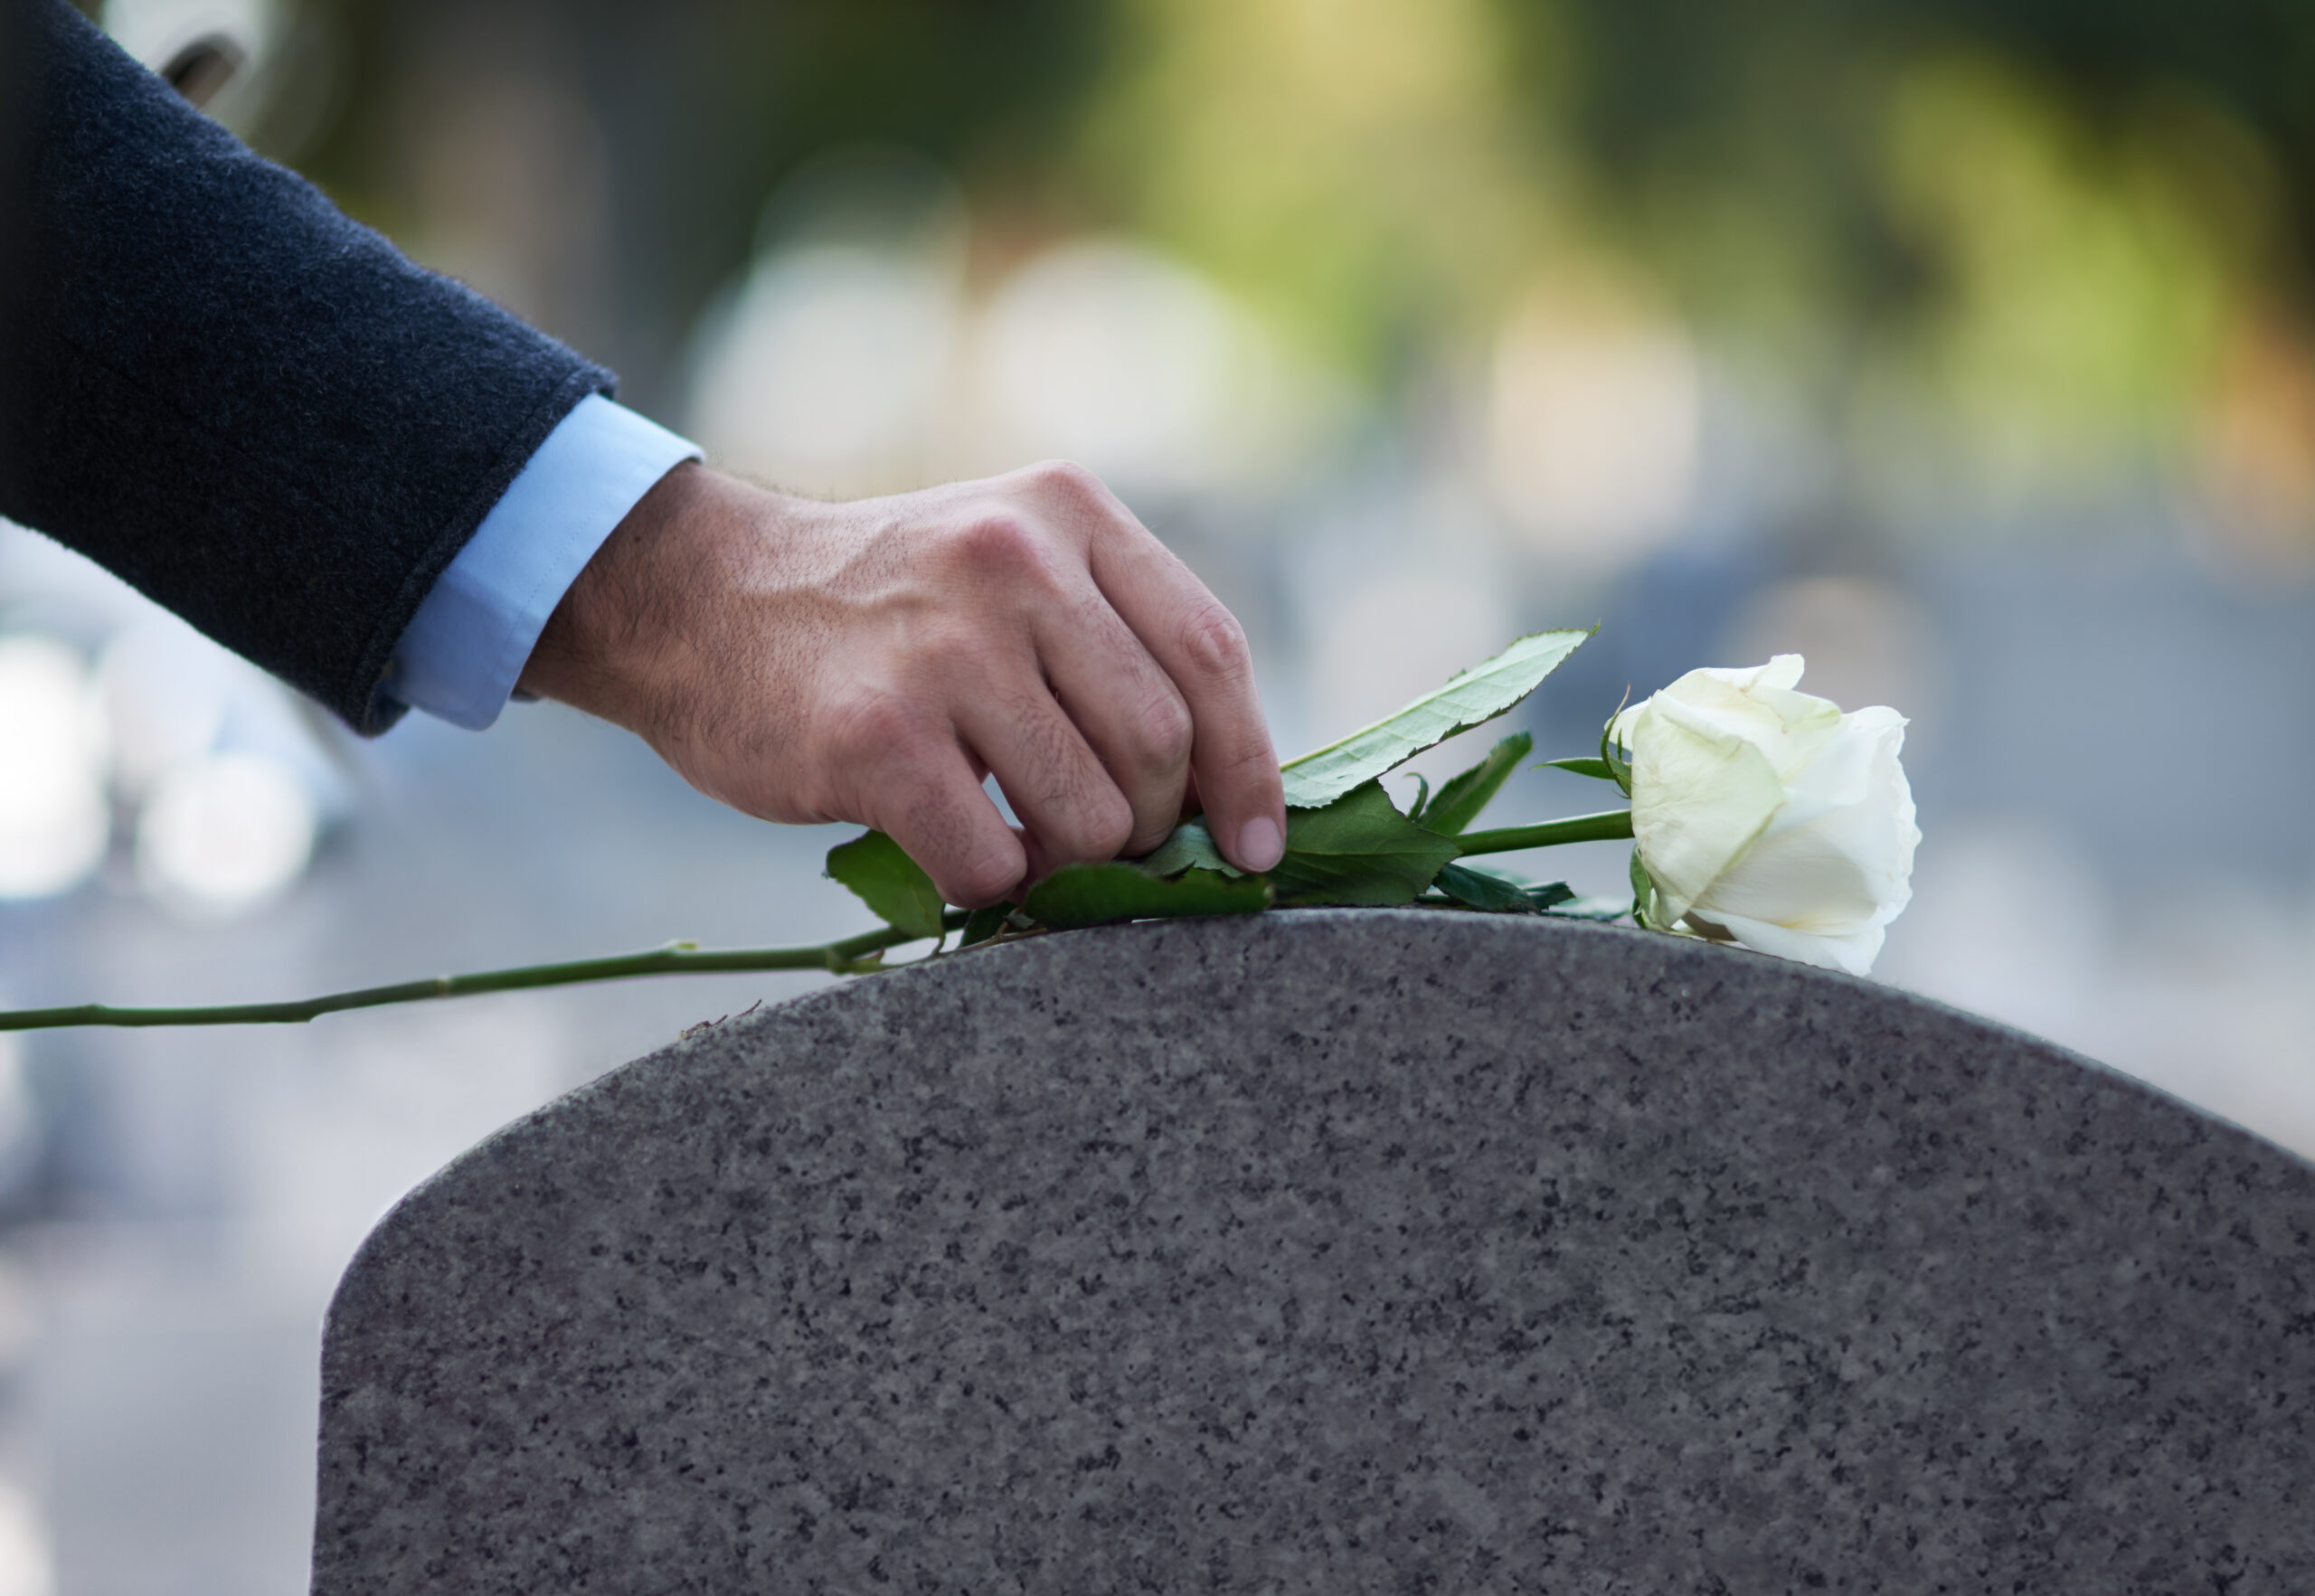 Recovering Compensation After the Wrongful Death of a Loved One in Texas